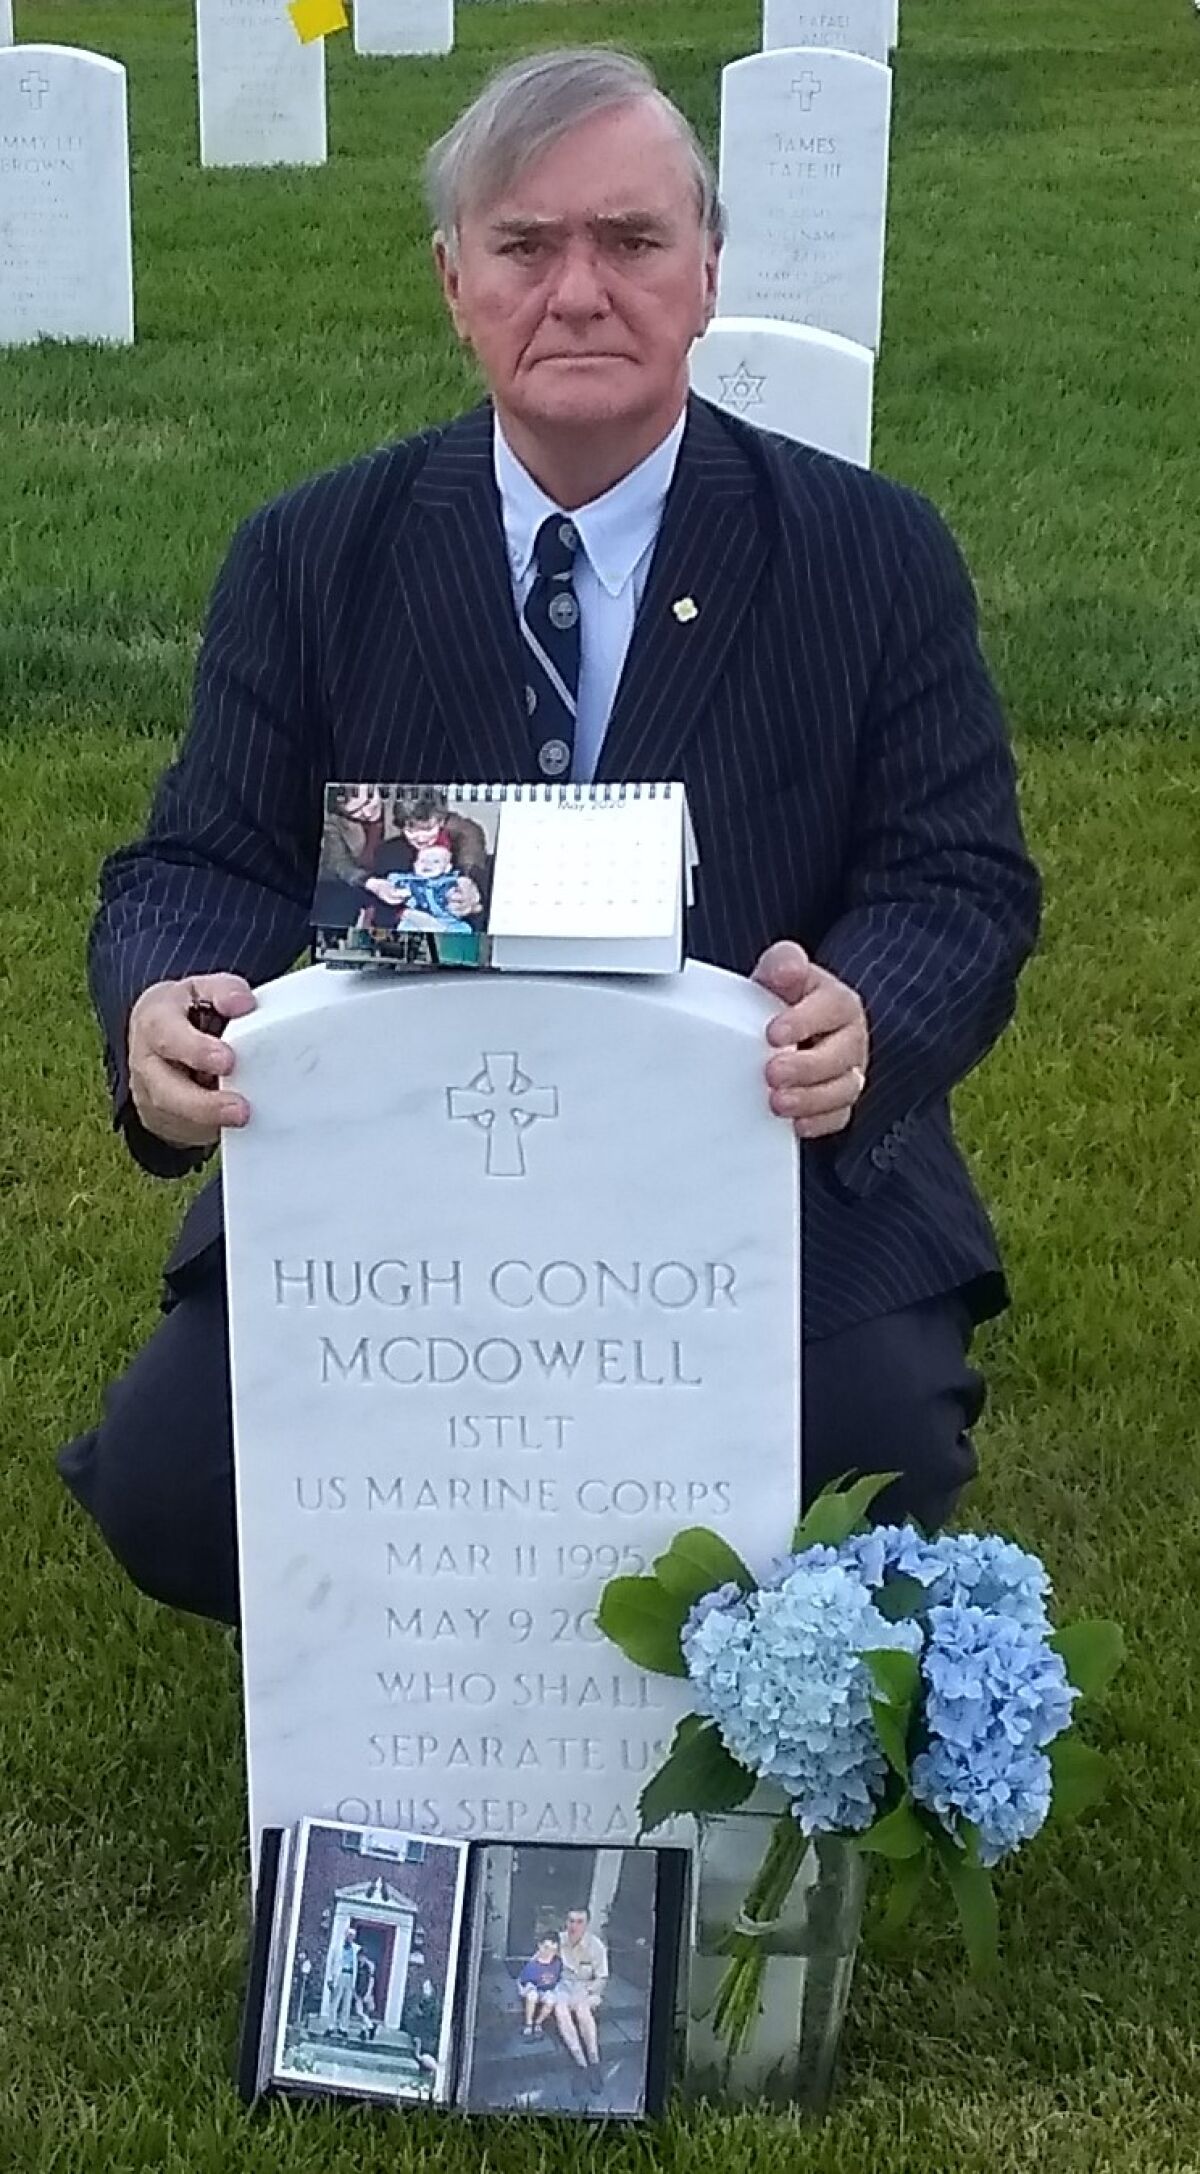 Michael McDowell at the grave of his son, 1st. Lt. Conor McDowell, at Arlington National Cemetery in Arlington, Va.